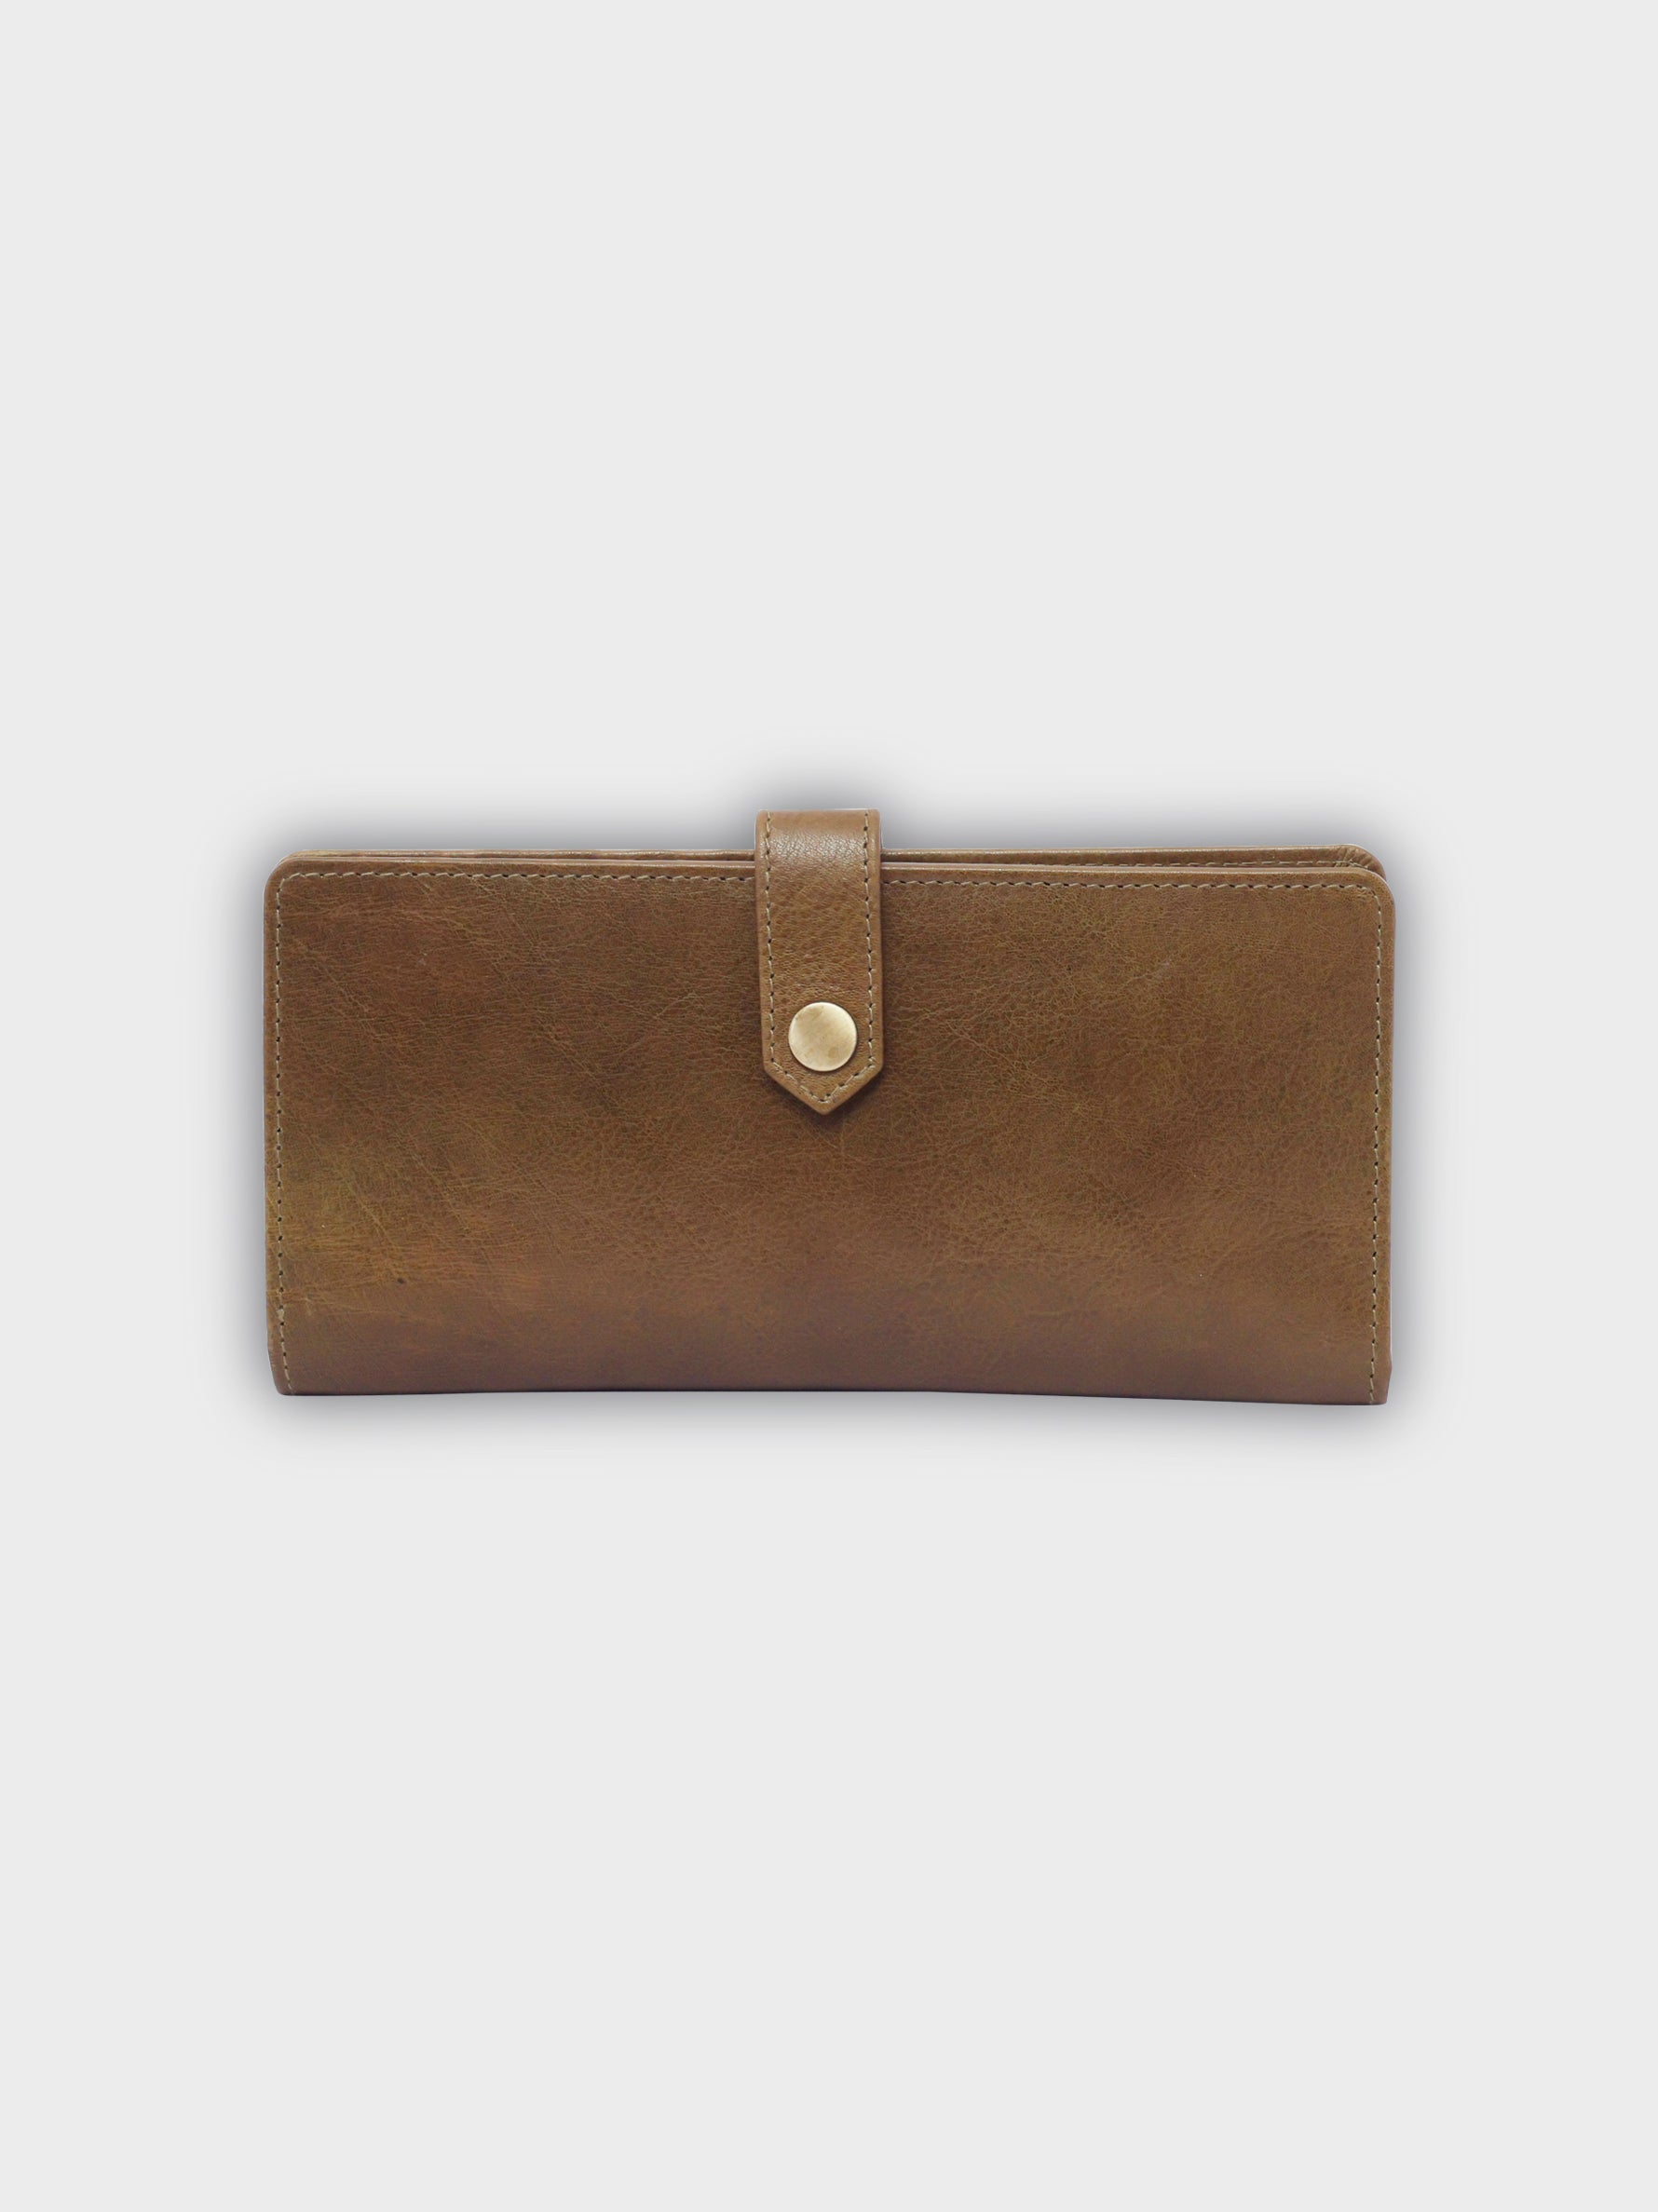 Handcrafted Genuine Vegetable Tanned Leather Twiggy Wallet Olive Green for Women Tan & Loom